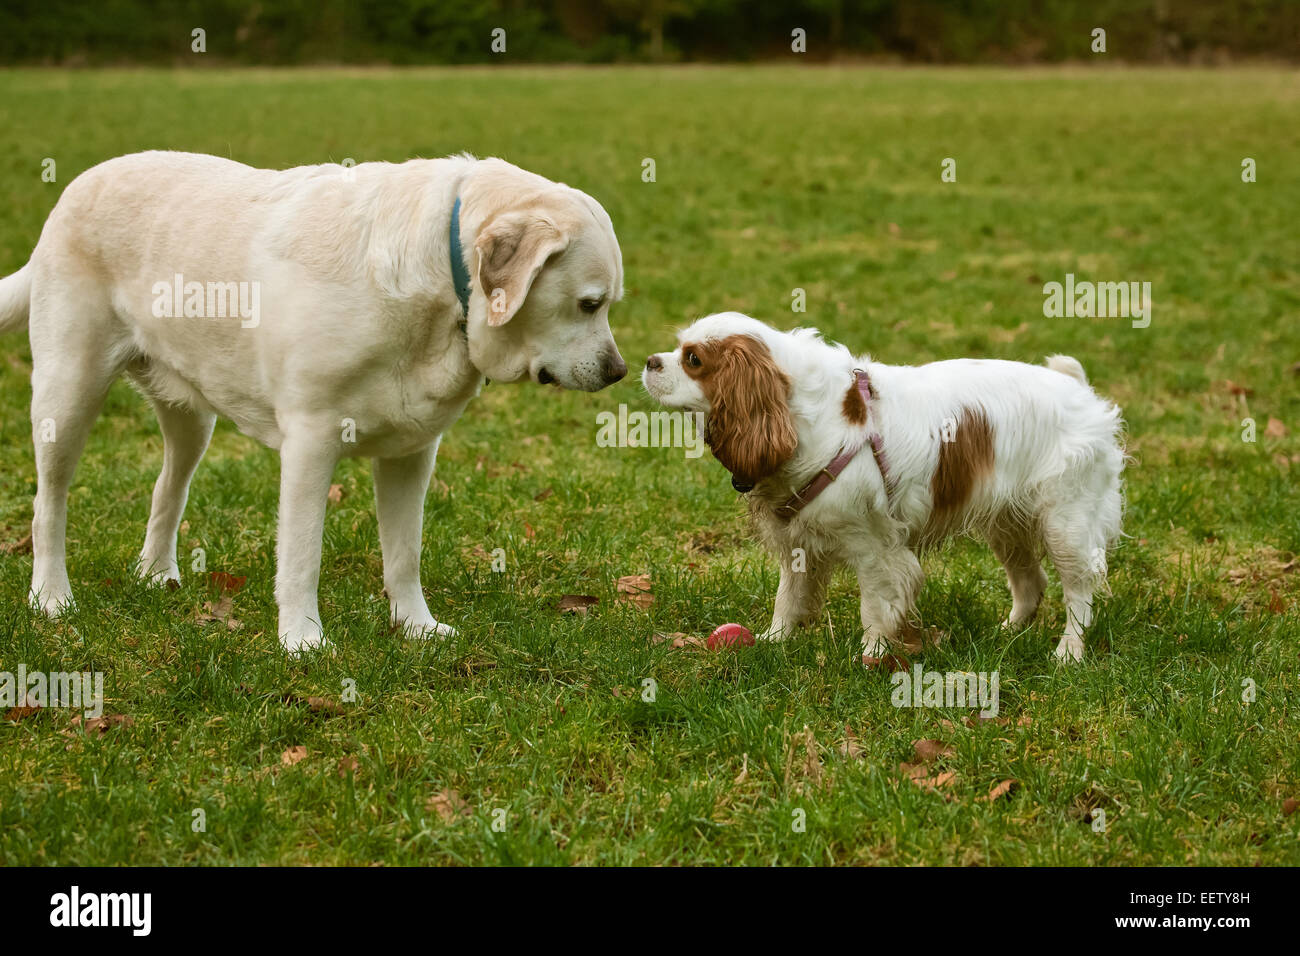 6 year old English Yellow Labrador, Murphy, sniffing noses while meeting a new dog, a 2 year old Cavalier King Charles Spaniel Stock Photo